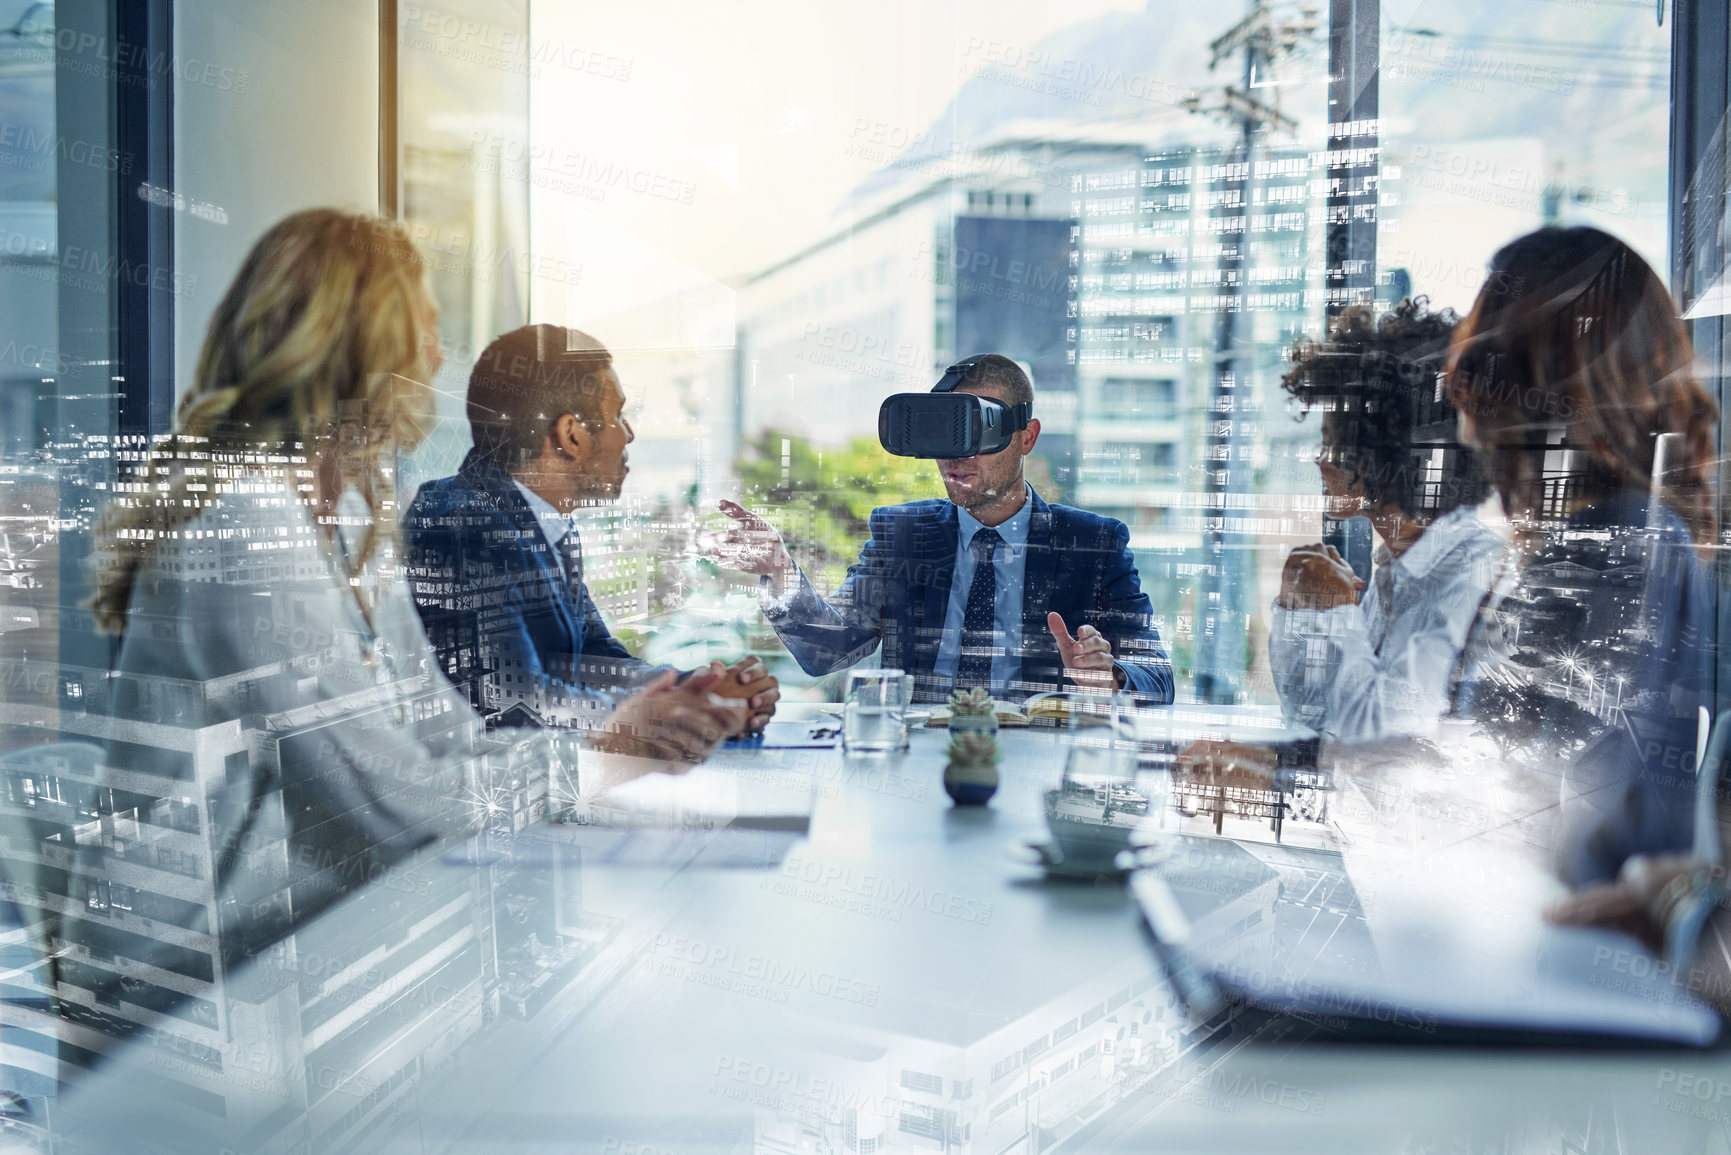 Buy stock photo Shot of a businessman wearing a VR headset during a meeting in the boardroom